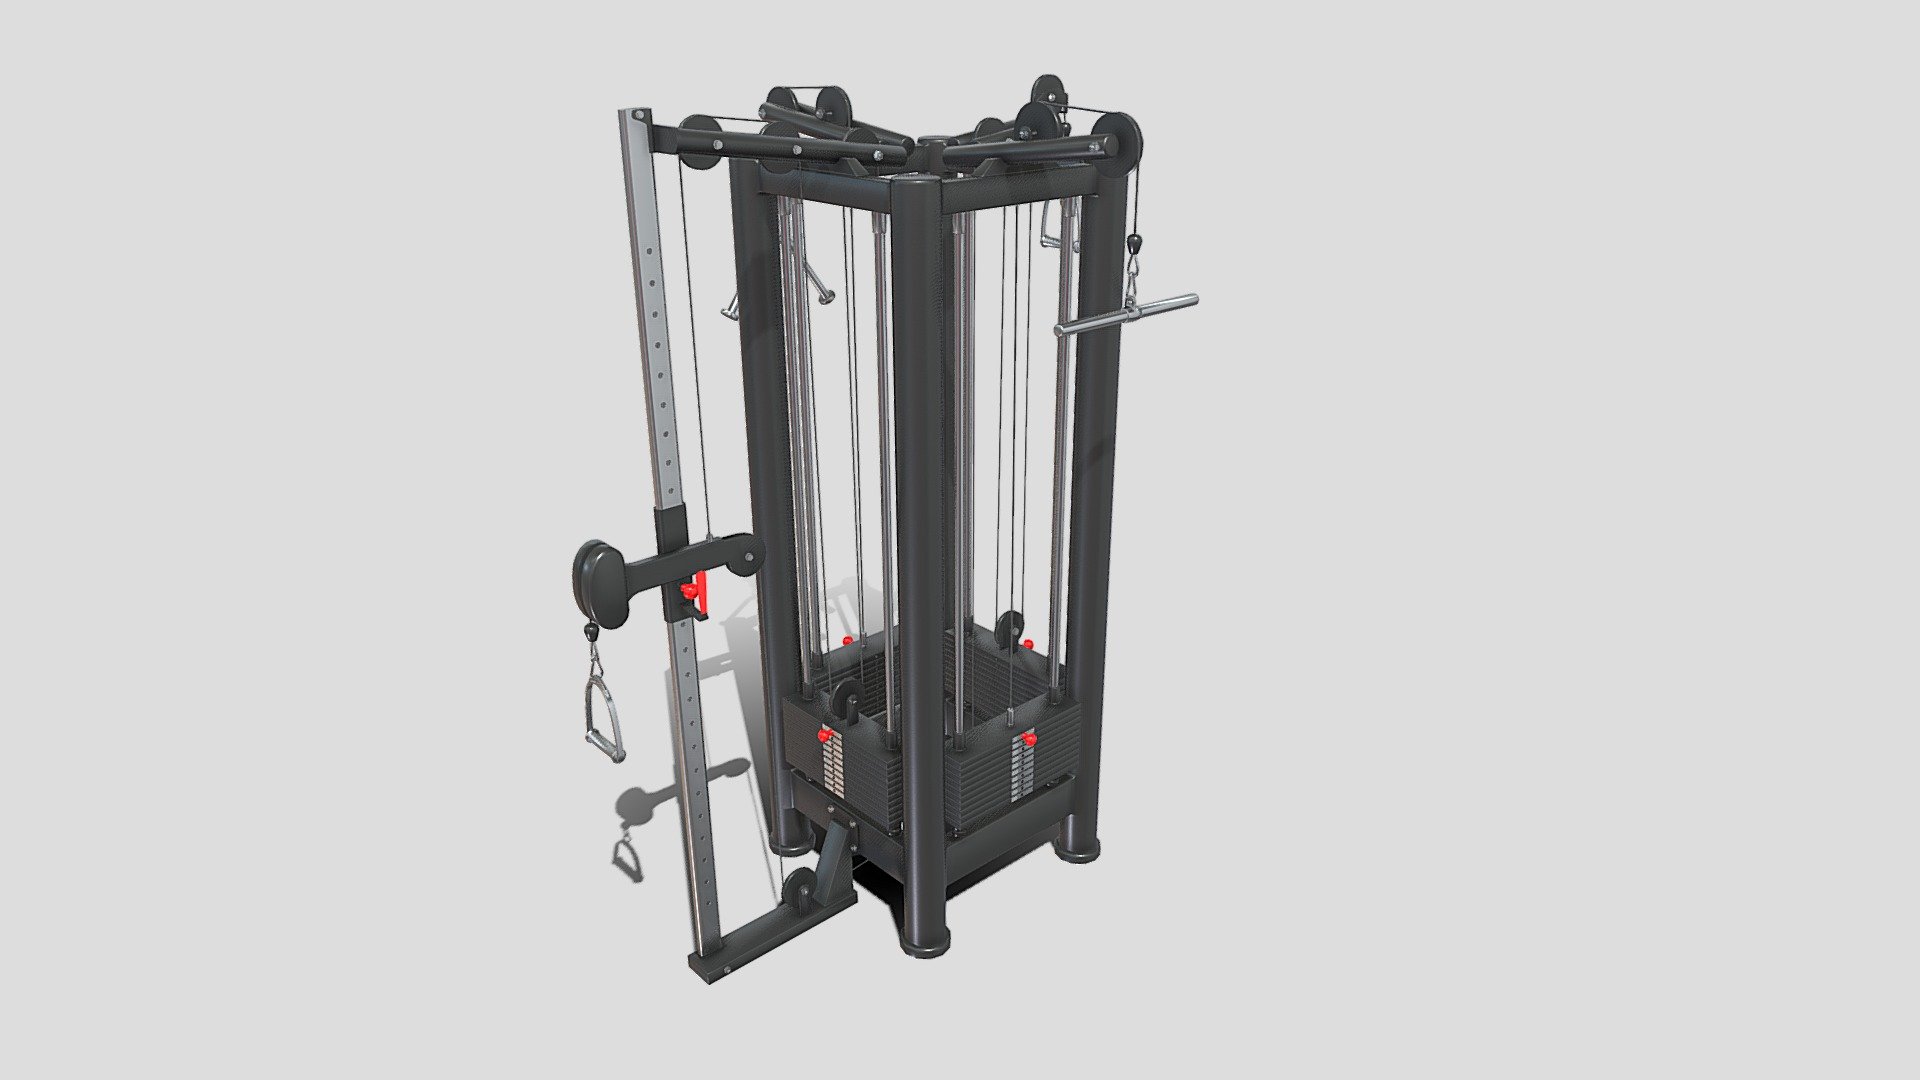 Gym machine 3d model built to real size, rendered with Cycles in Blender, as per seen on attached images. 

File formats:
-.blend, rendered with cycles, as seen in the images;
-.obj, with materials applied;
-.dae, with materials applied;
-.fbx, with materials applied;
-.stl;

Files come named appropriately and split by file format.

3D Software:
The 3D model was originally created in Blender 3.1 and rendered with Cycles.

Materials and textures:
The models have materials applied in all formats, and are ready to import and render.
Materials are image based using PBR, the model comes with four 4k png image textures.

Preview scenes:
The preview images are rendered in Blender using its built-in render engine &lsquo;Cycles'.
Note that the blend files come directly with the rendering scene included and the render command will generate the exact result as seen in previews.

General:
The models are built mostly out of quads.

For any problems please feel free to contact me.

Don't forget to rate and enjoy! - 4 Station Multi Gym - Buy Royalty Free 3D model by dragosburian 3d model